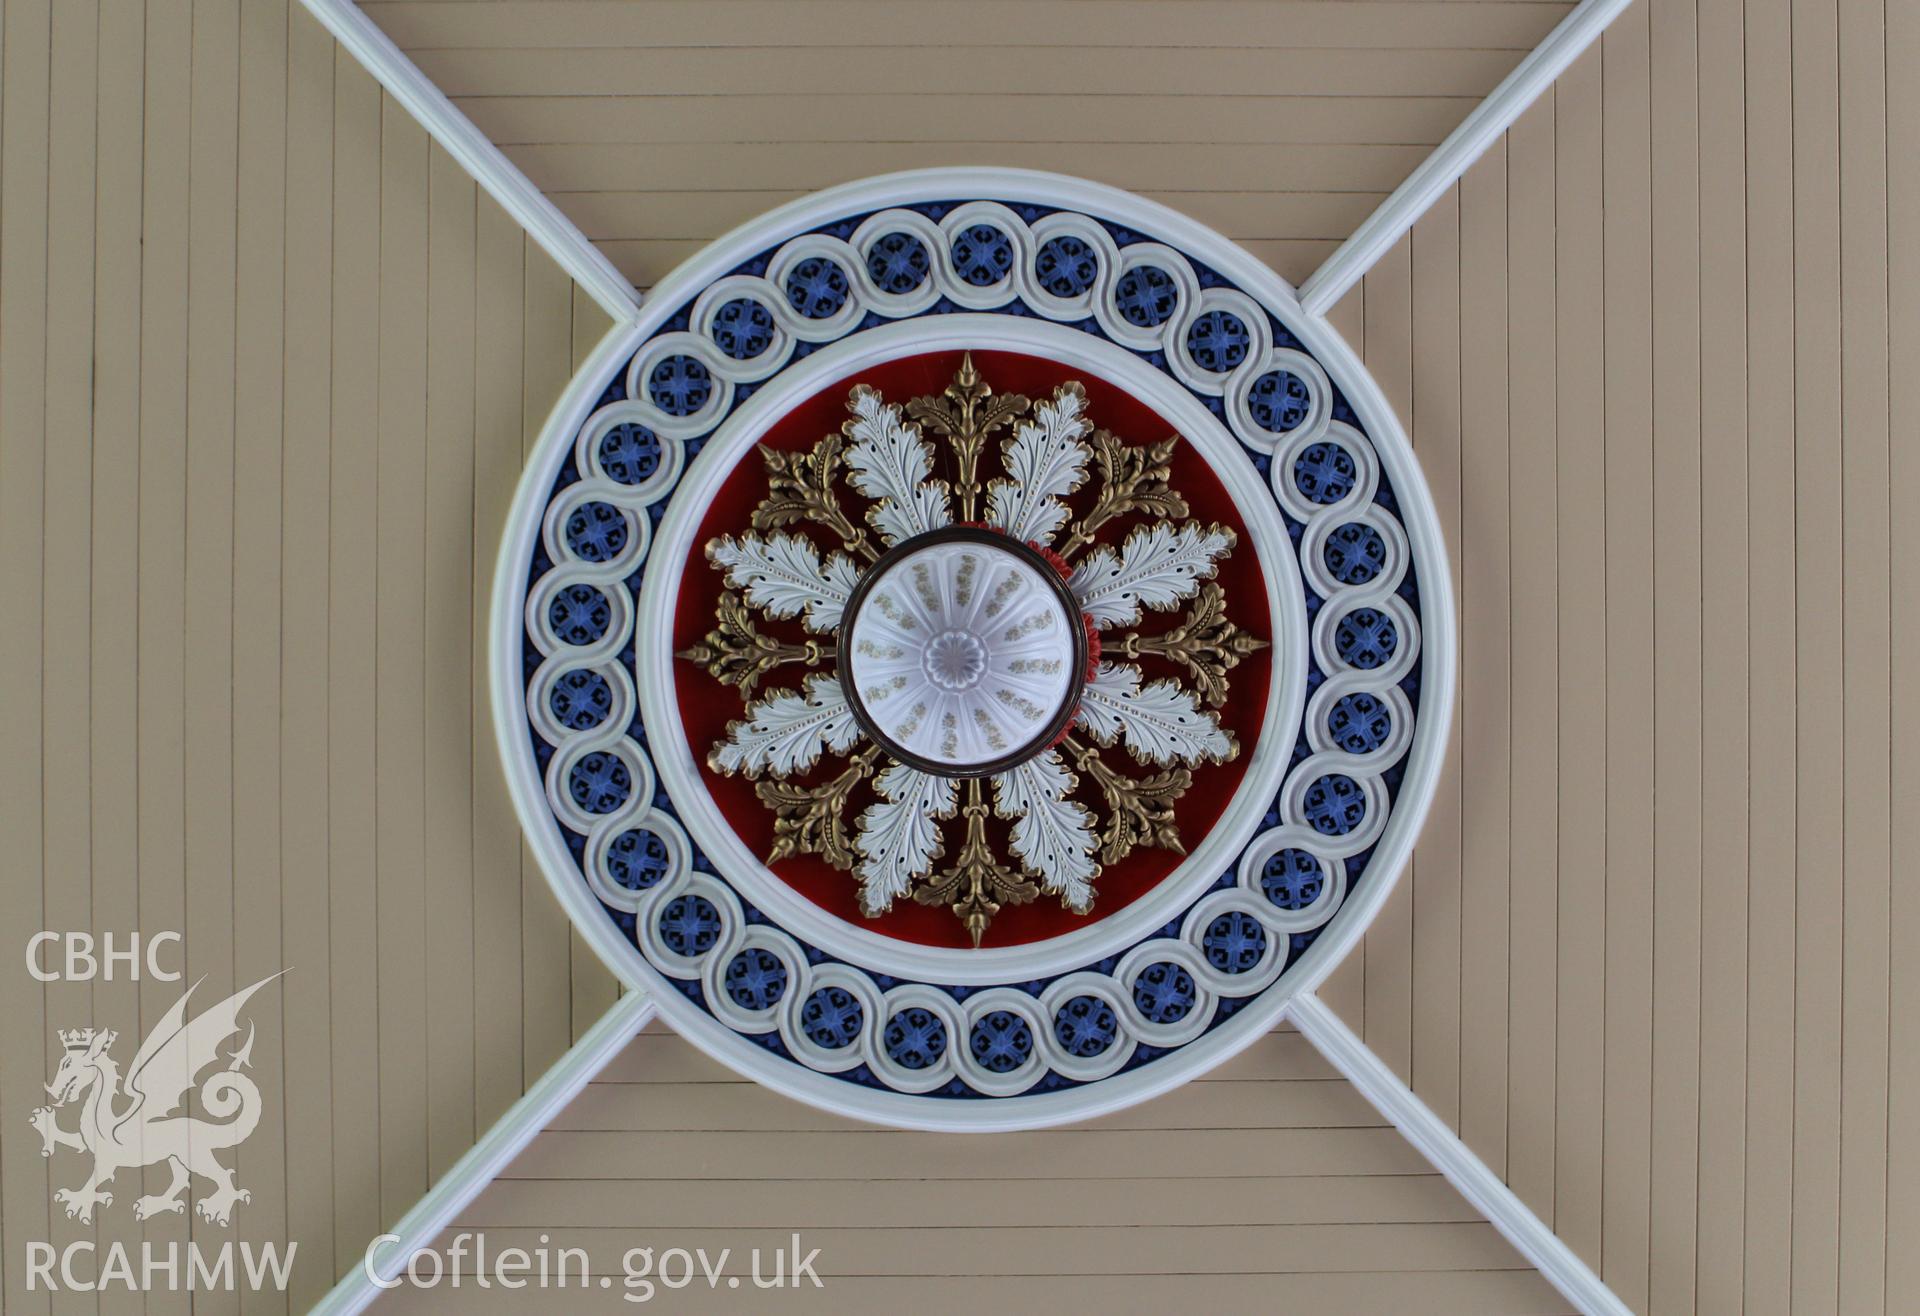 Interior view of ceiling detail. Photographic survey of Seion Welsh Baptist Chapel, Morriston, conducted by Sue Fielding on 13th May 2017.